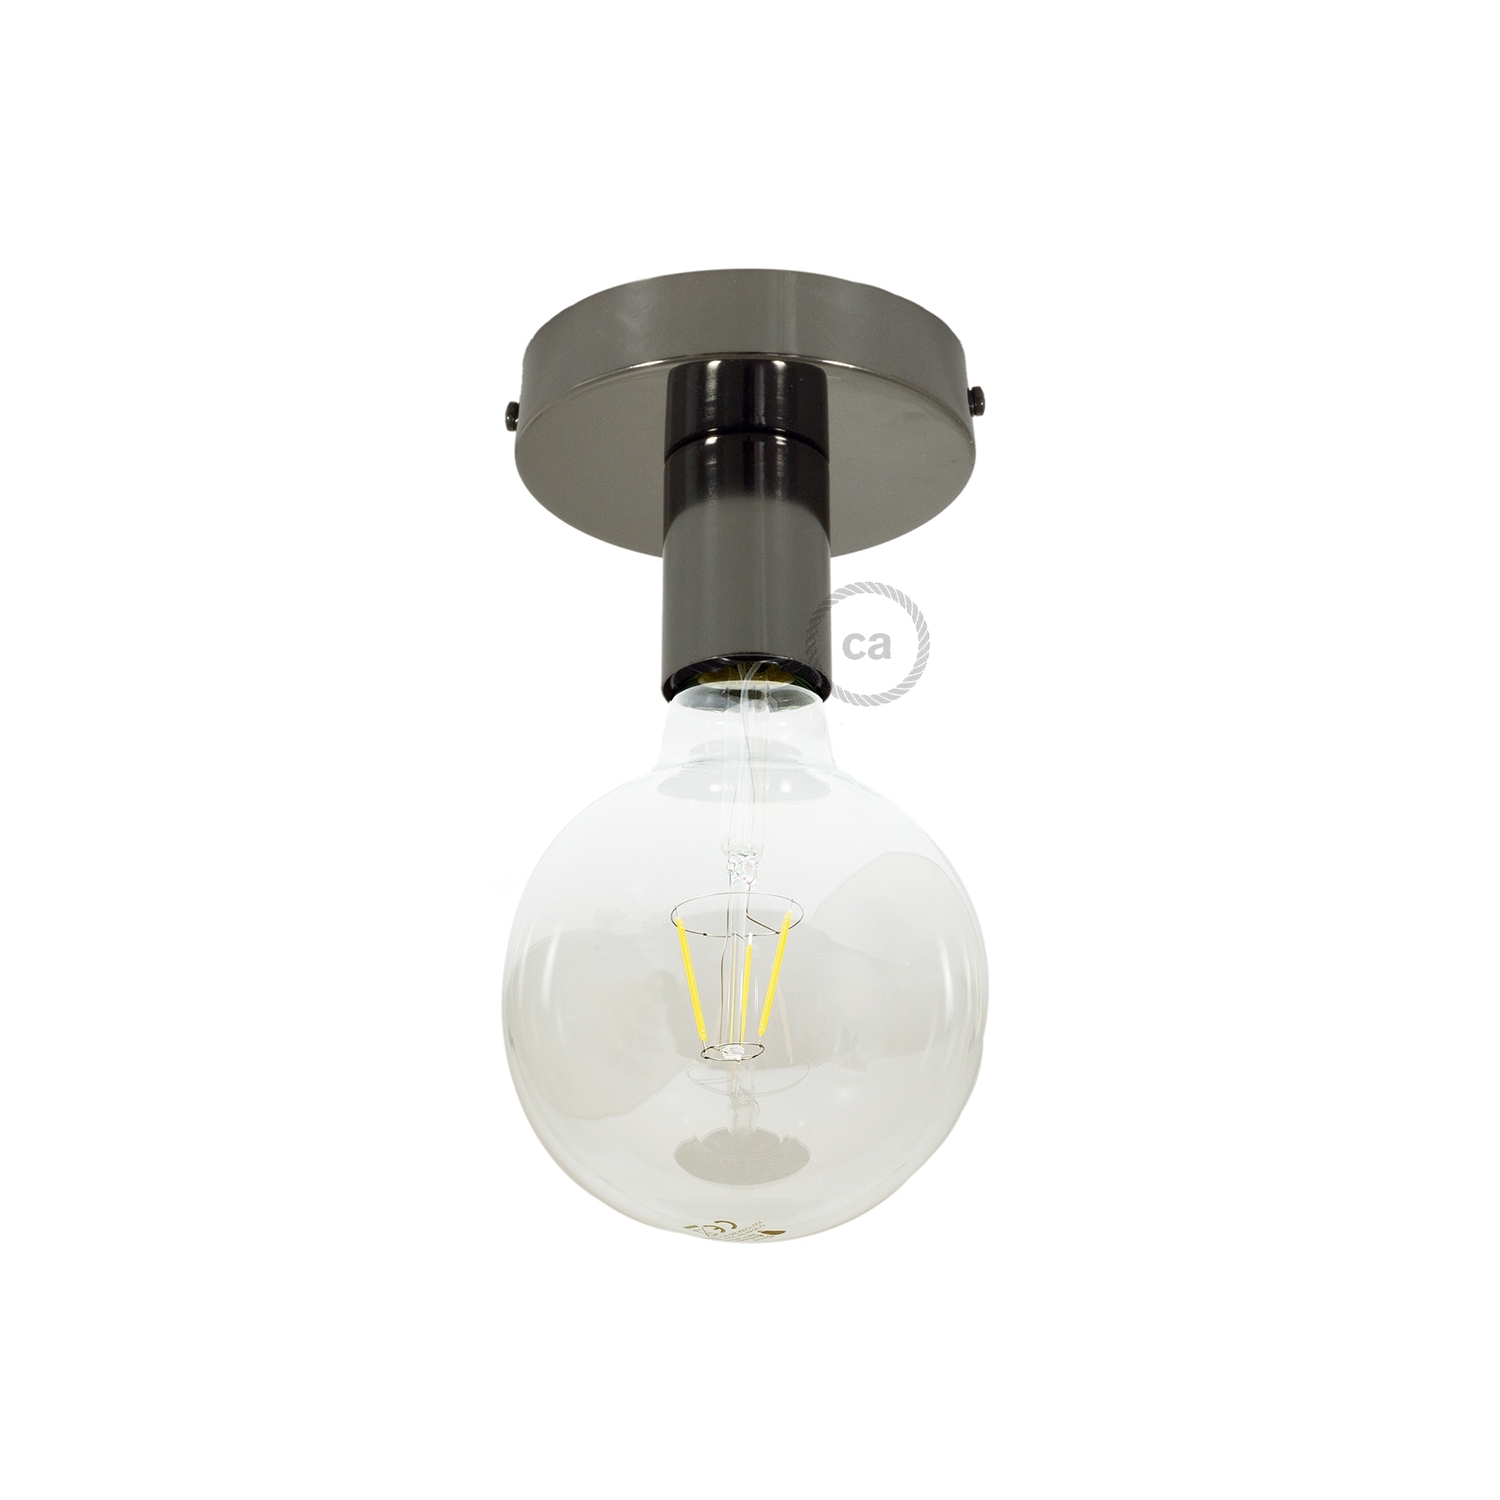 Fermaluce, the black pearl metal wall or ceiling light source.